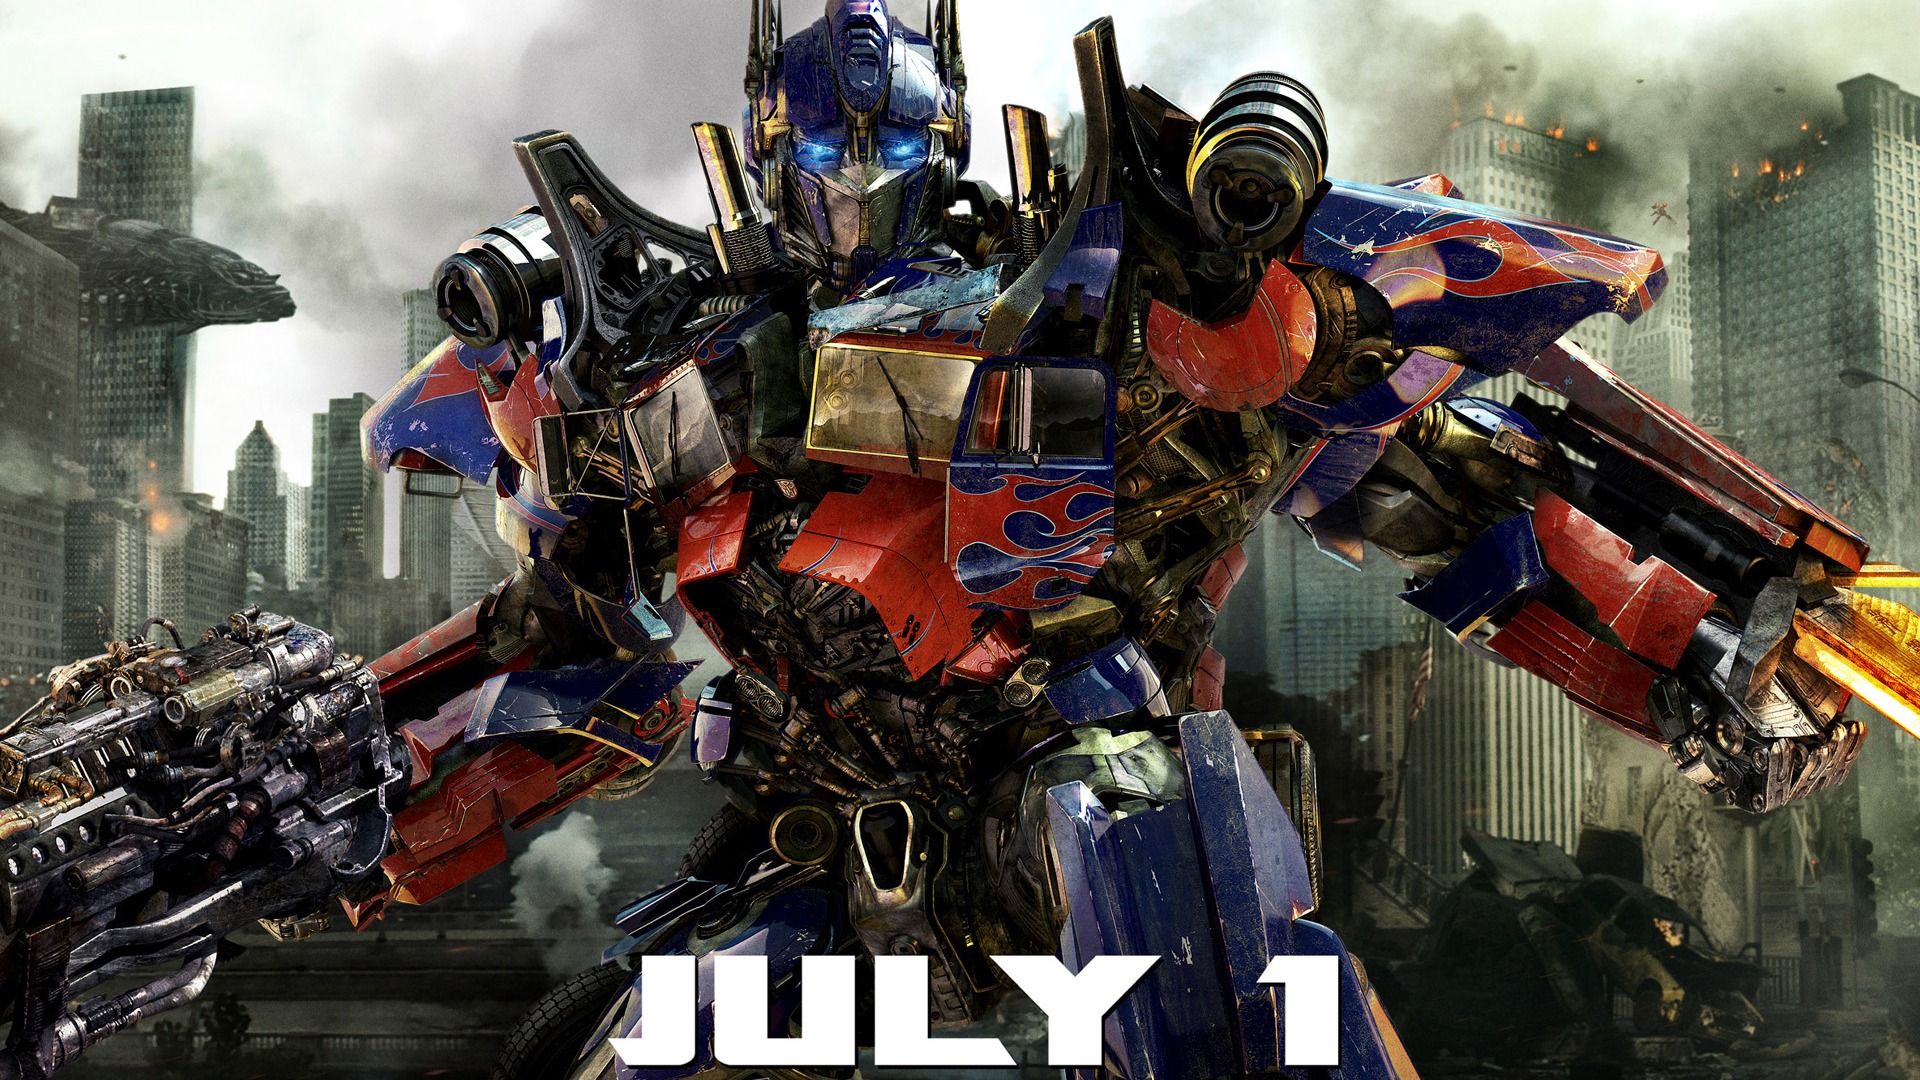 Transformers: The Dark Of The Moon HD wallpapers #1 - 1920x1080